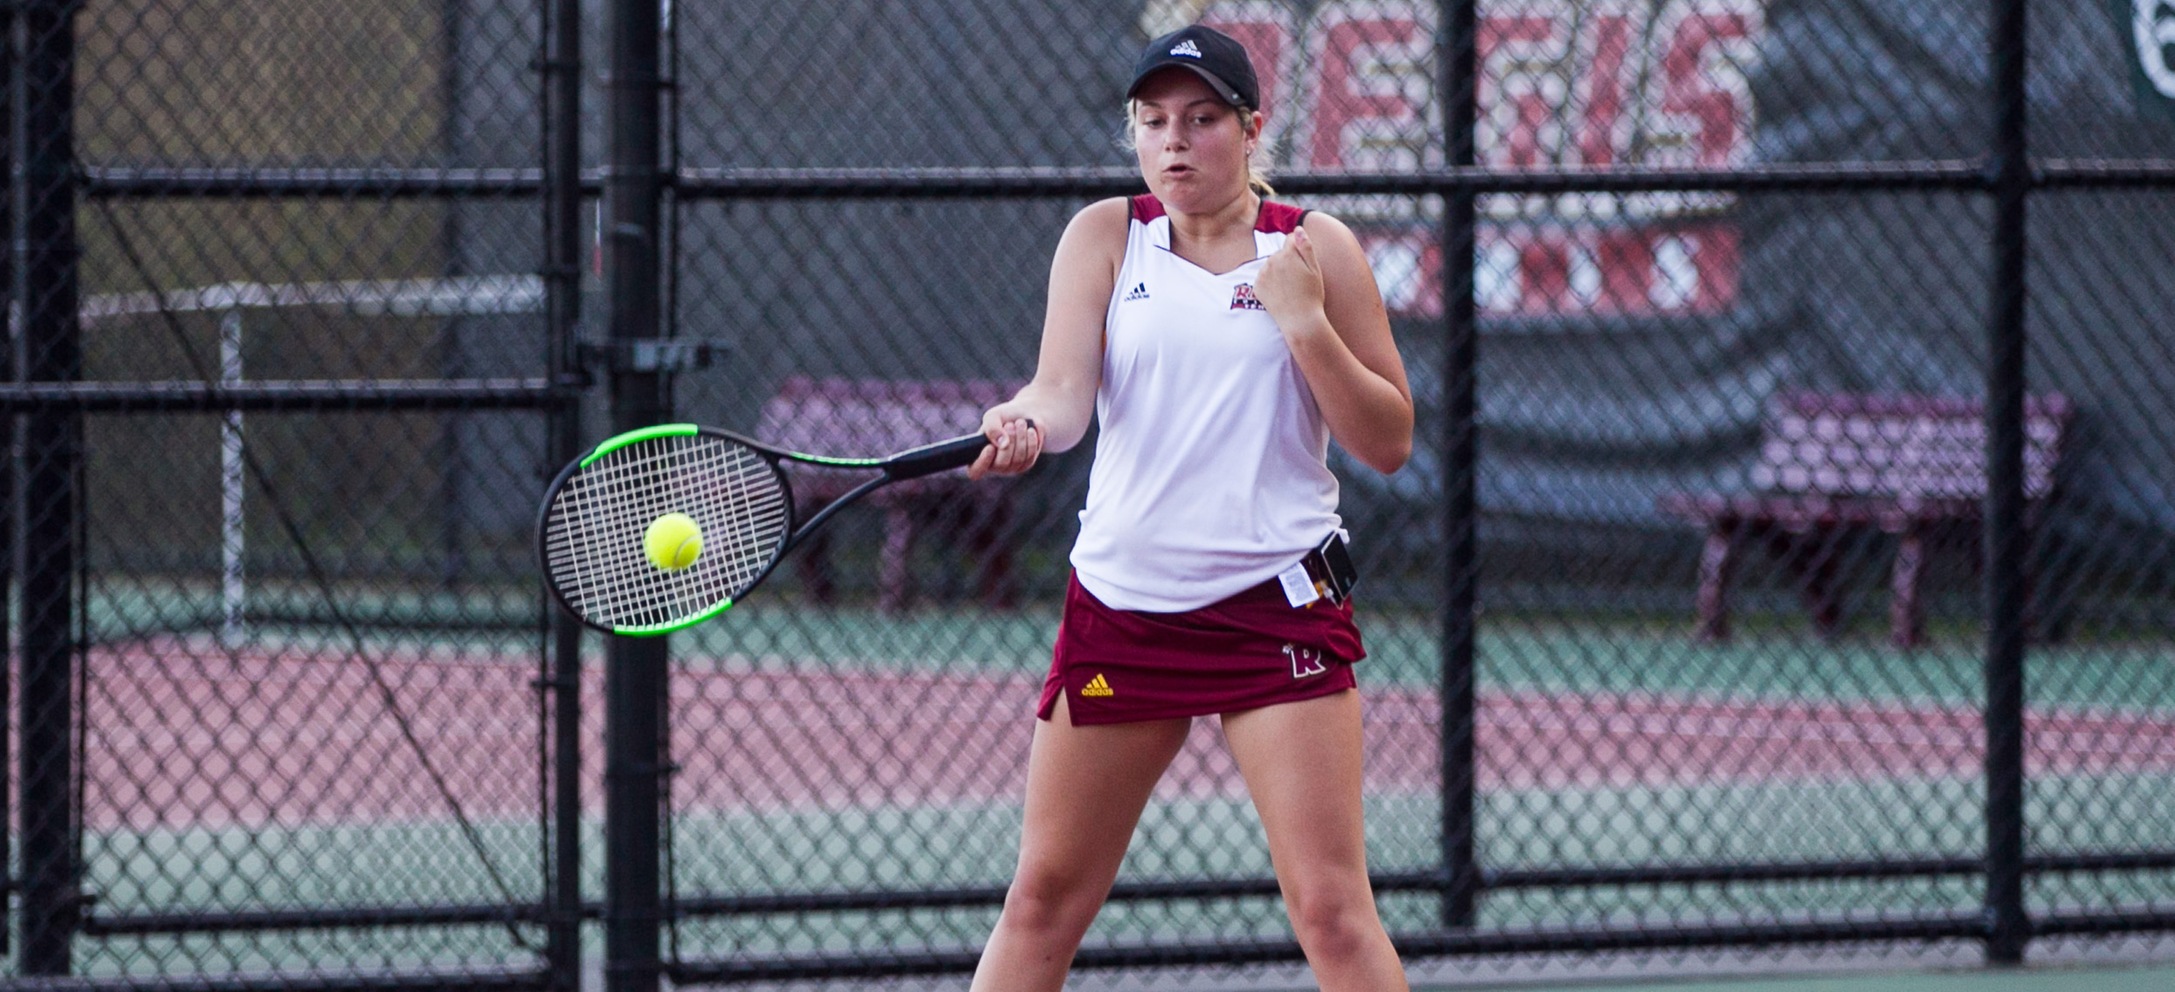 Jarest Wins Twice, Clinches Win For Women's Tennis Over Wentworth